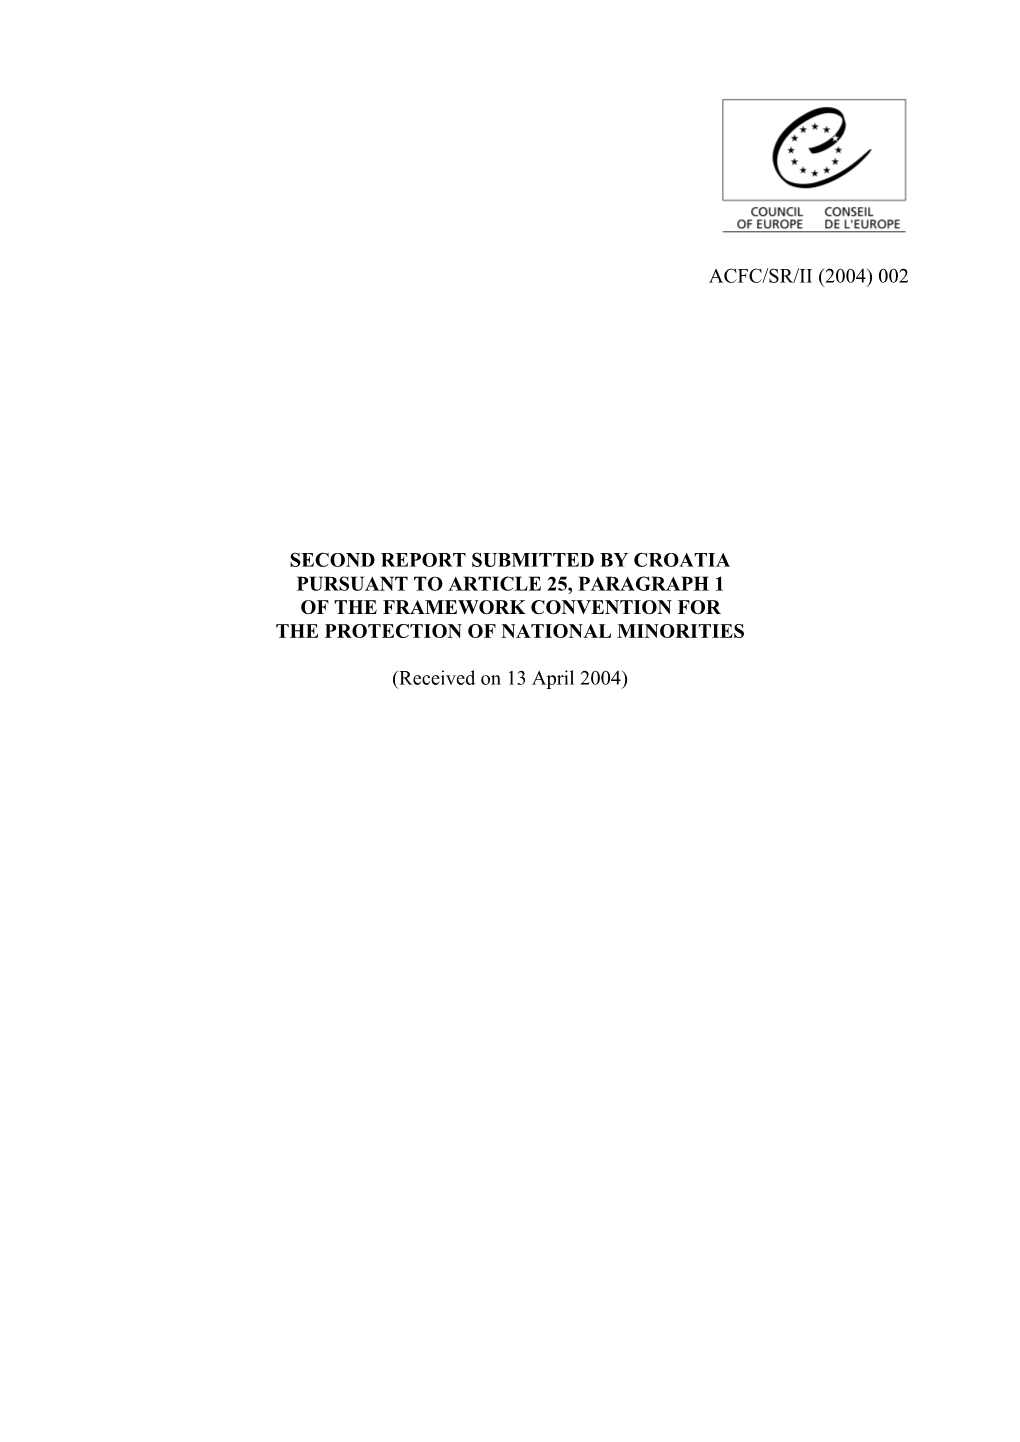 002 Second Report Submitted by Croatia Pursuant to Article 25, Paragraph 1 of the Framework Convention For